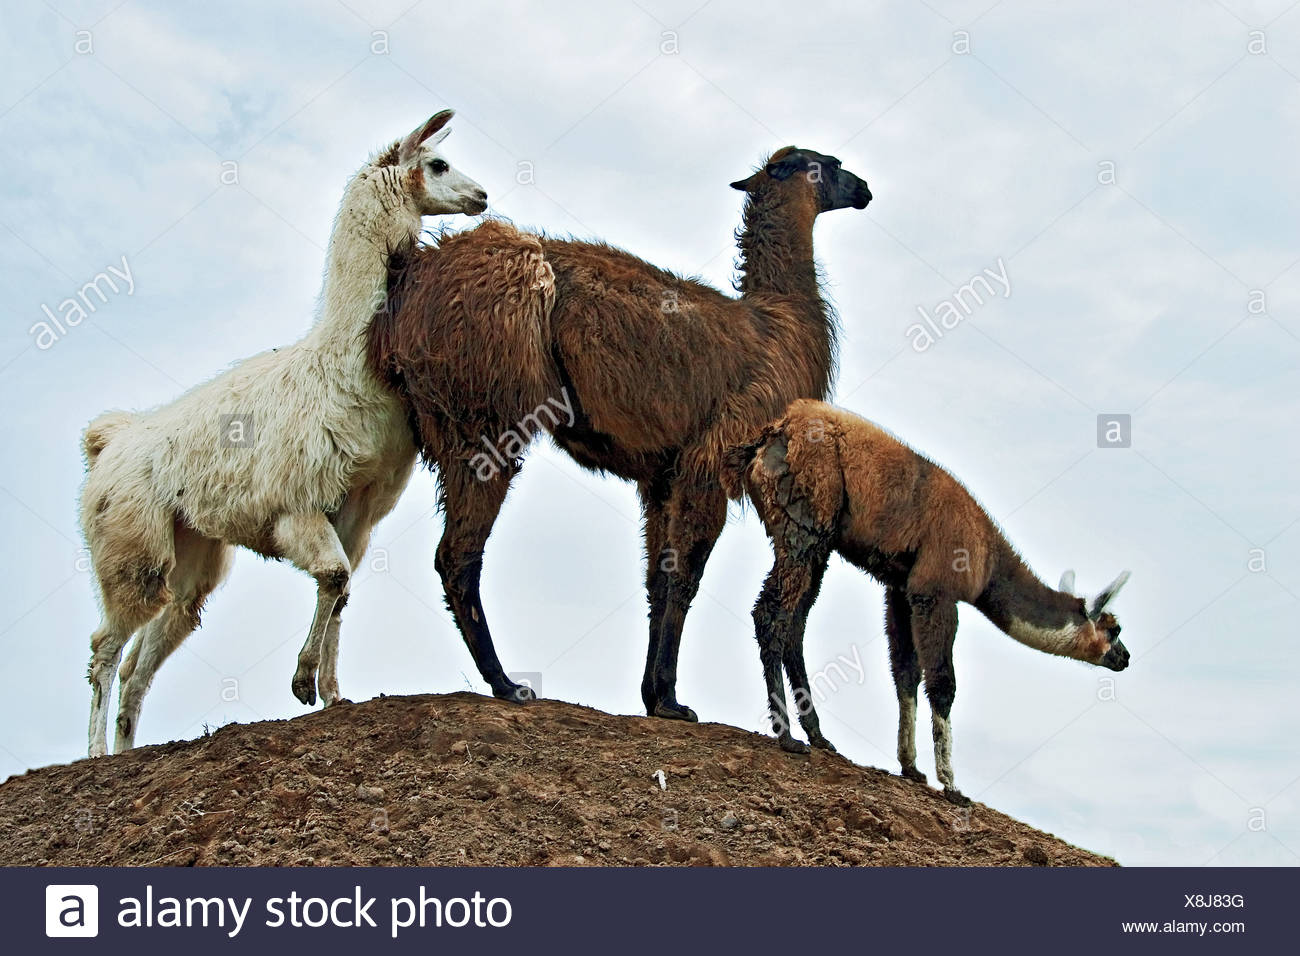 Three Lamas High Resolution Stock Photography and Images - Alamy